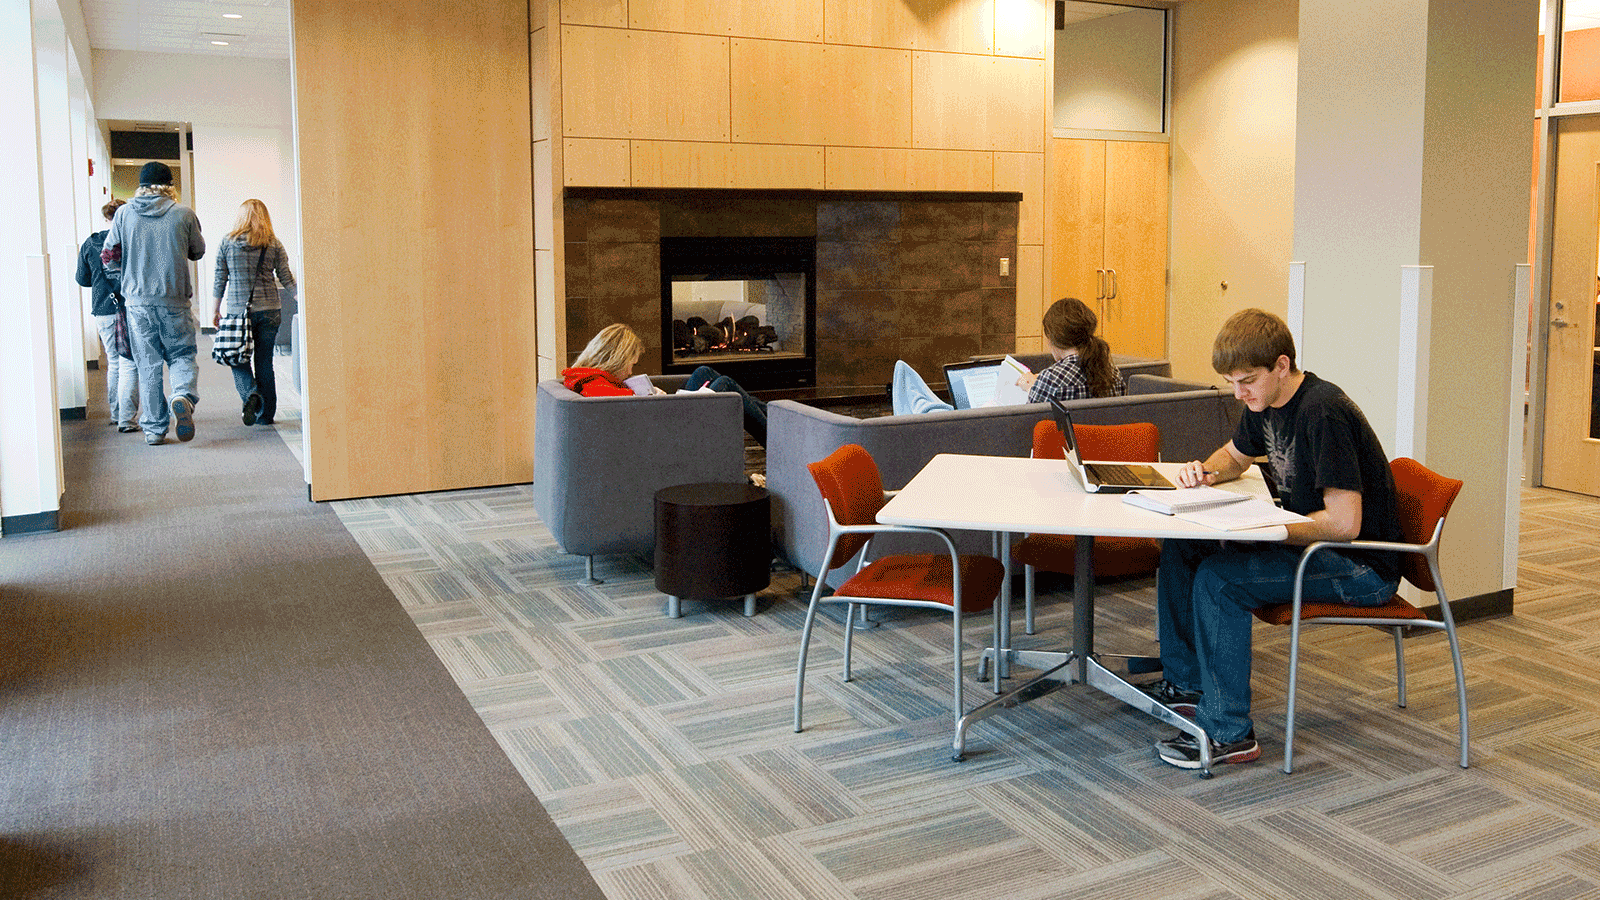 Students in study area of residence hall